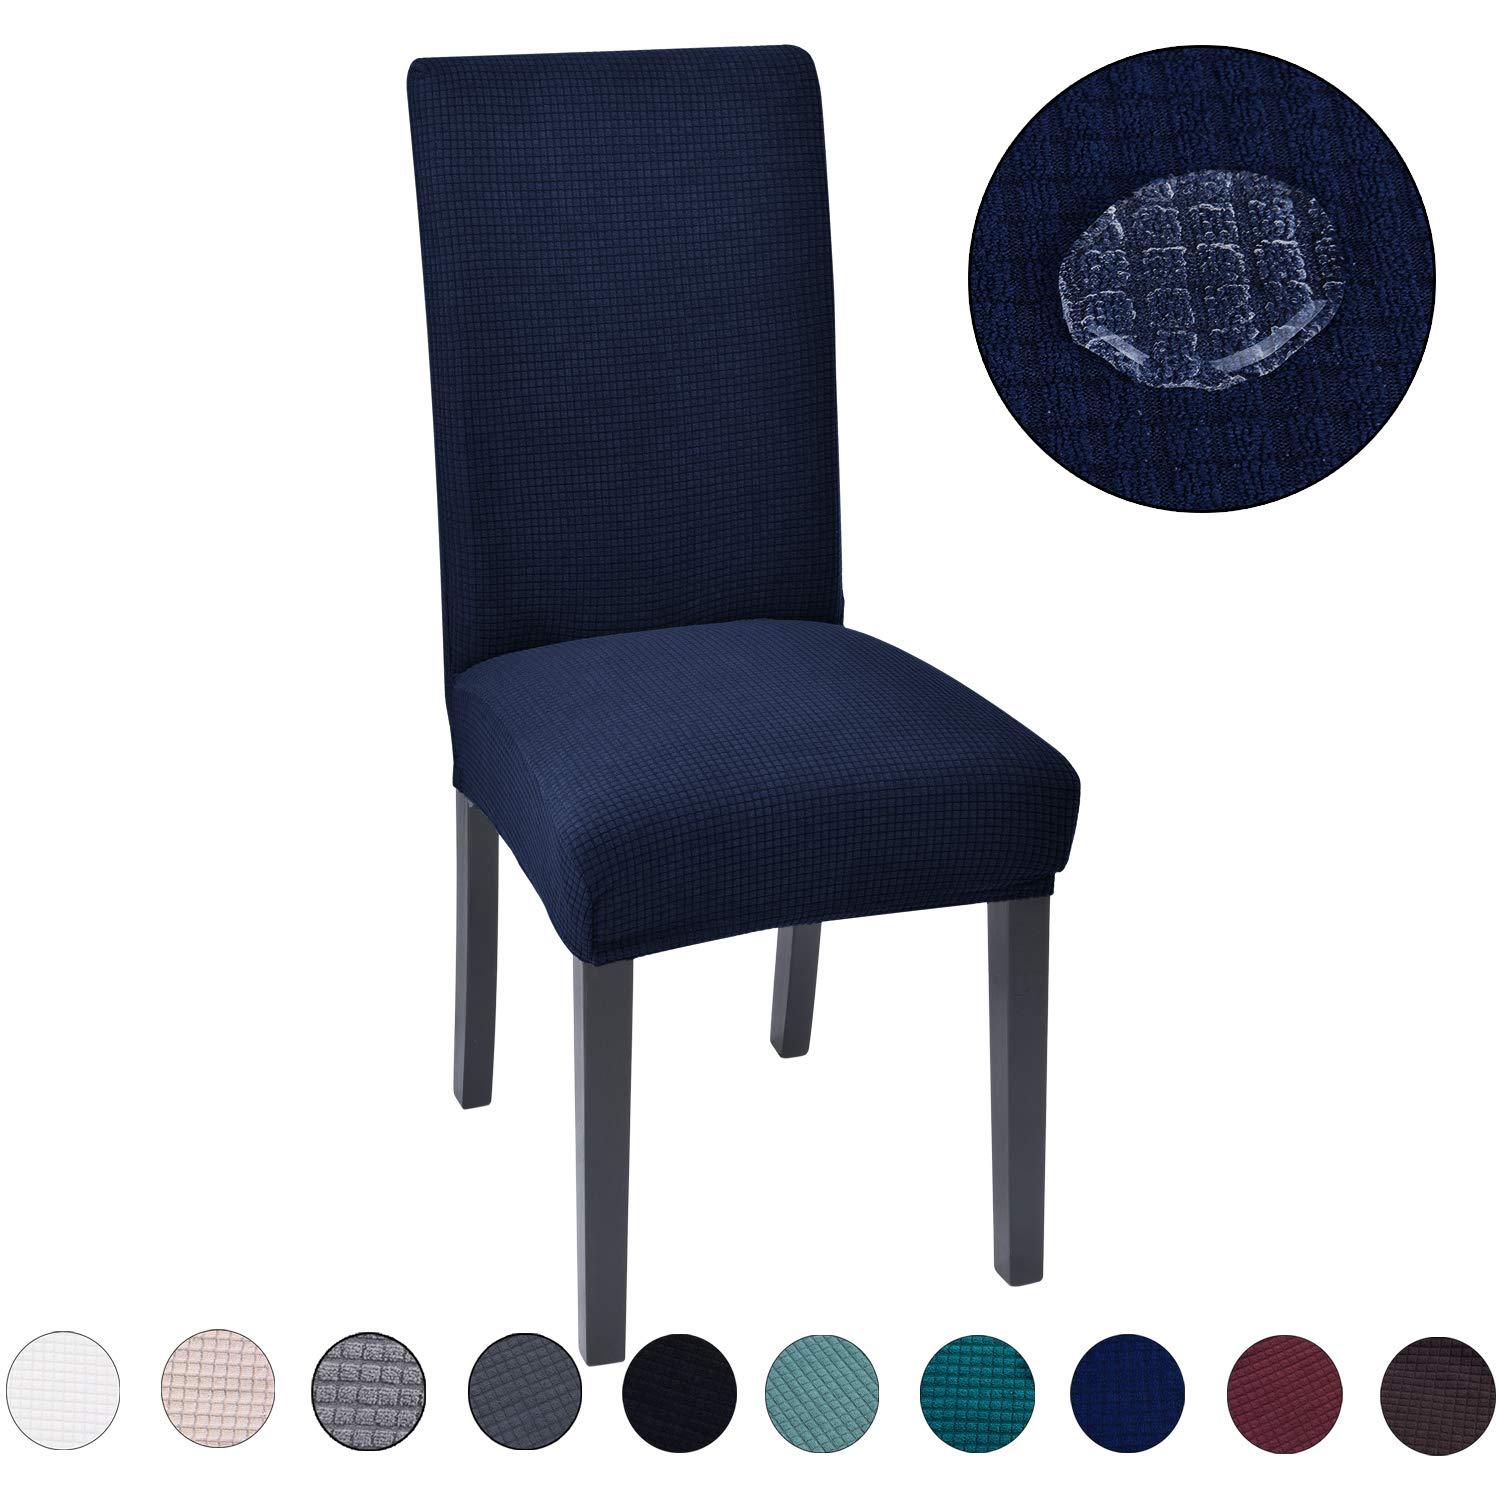 (💥Save 50% OFF - Mother's Day sale) Thickened Stretchable Waterproof Chair Cover - BUY 4+ FREE SHIPPING